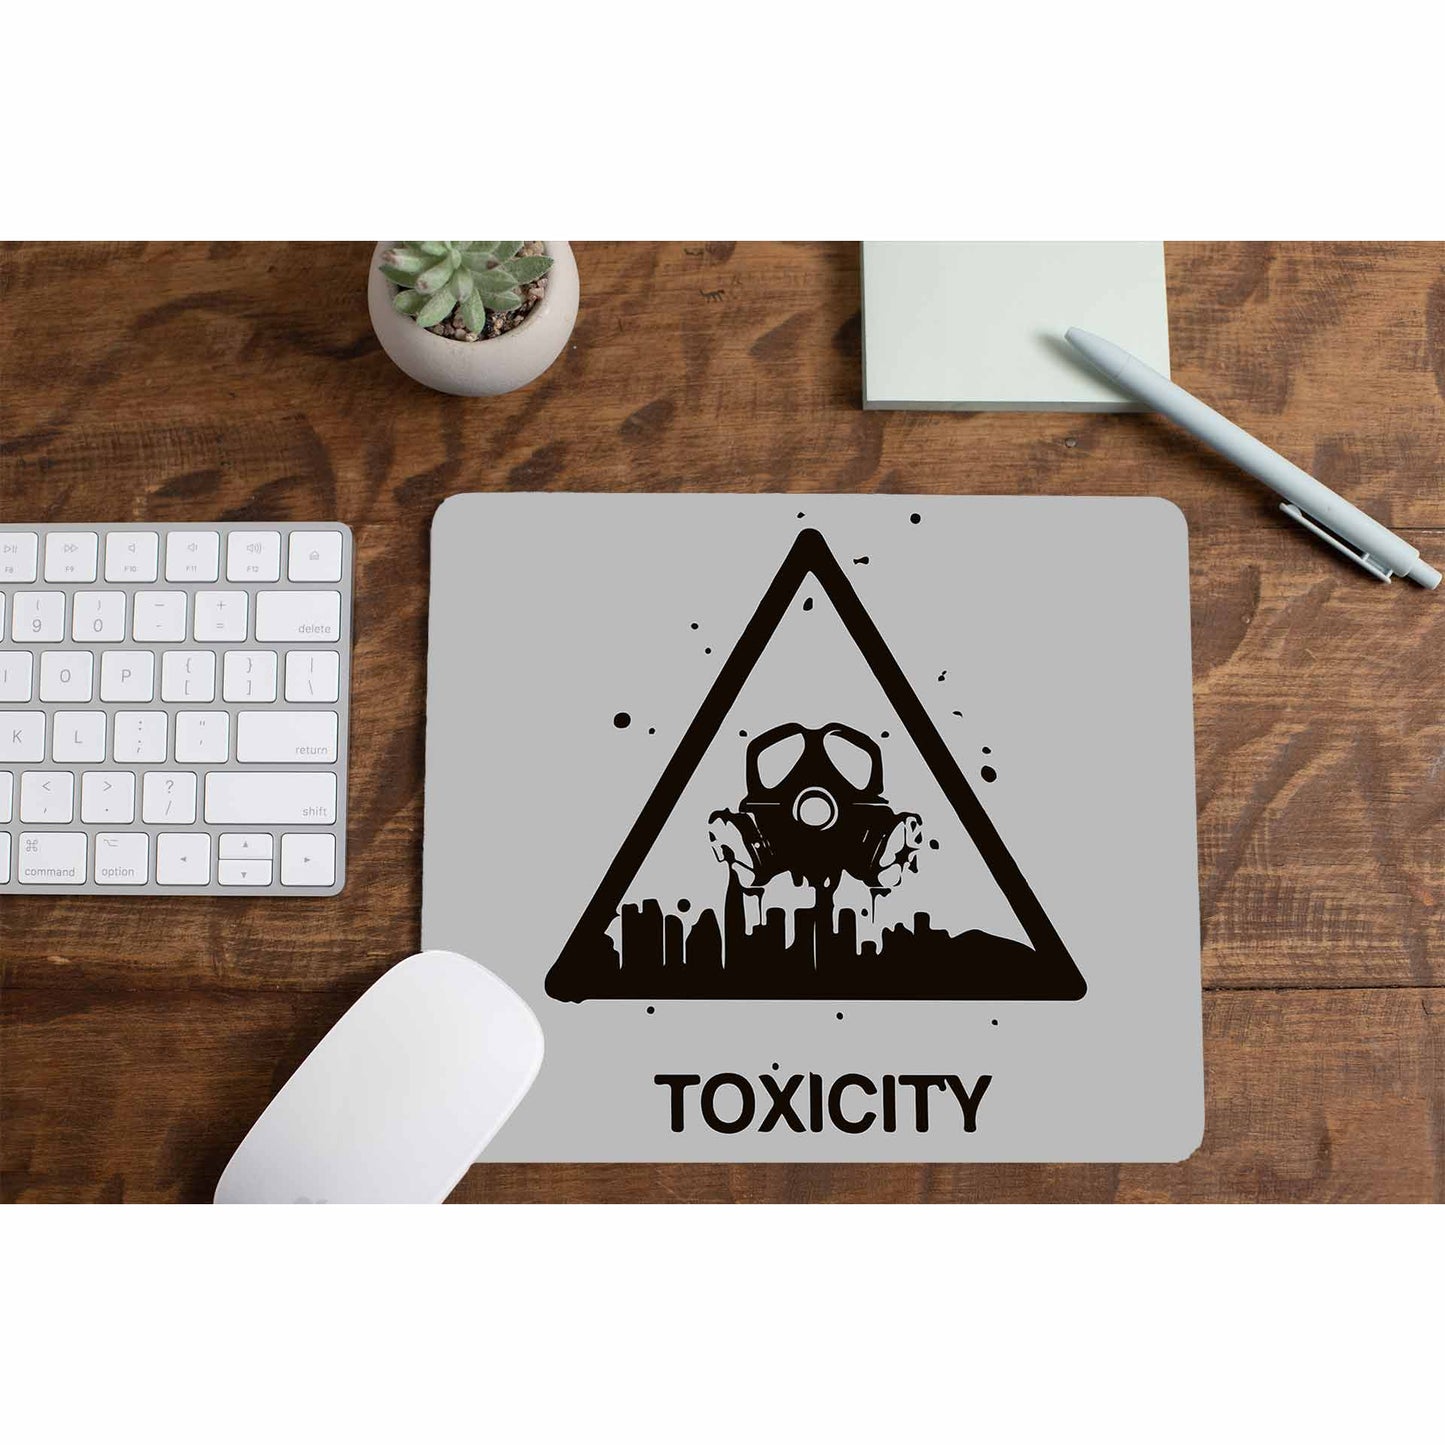 system of a down toxicity mousepad logitech large anime music band buy online india the banyan tee tbt men women girls boys unisex